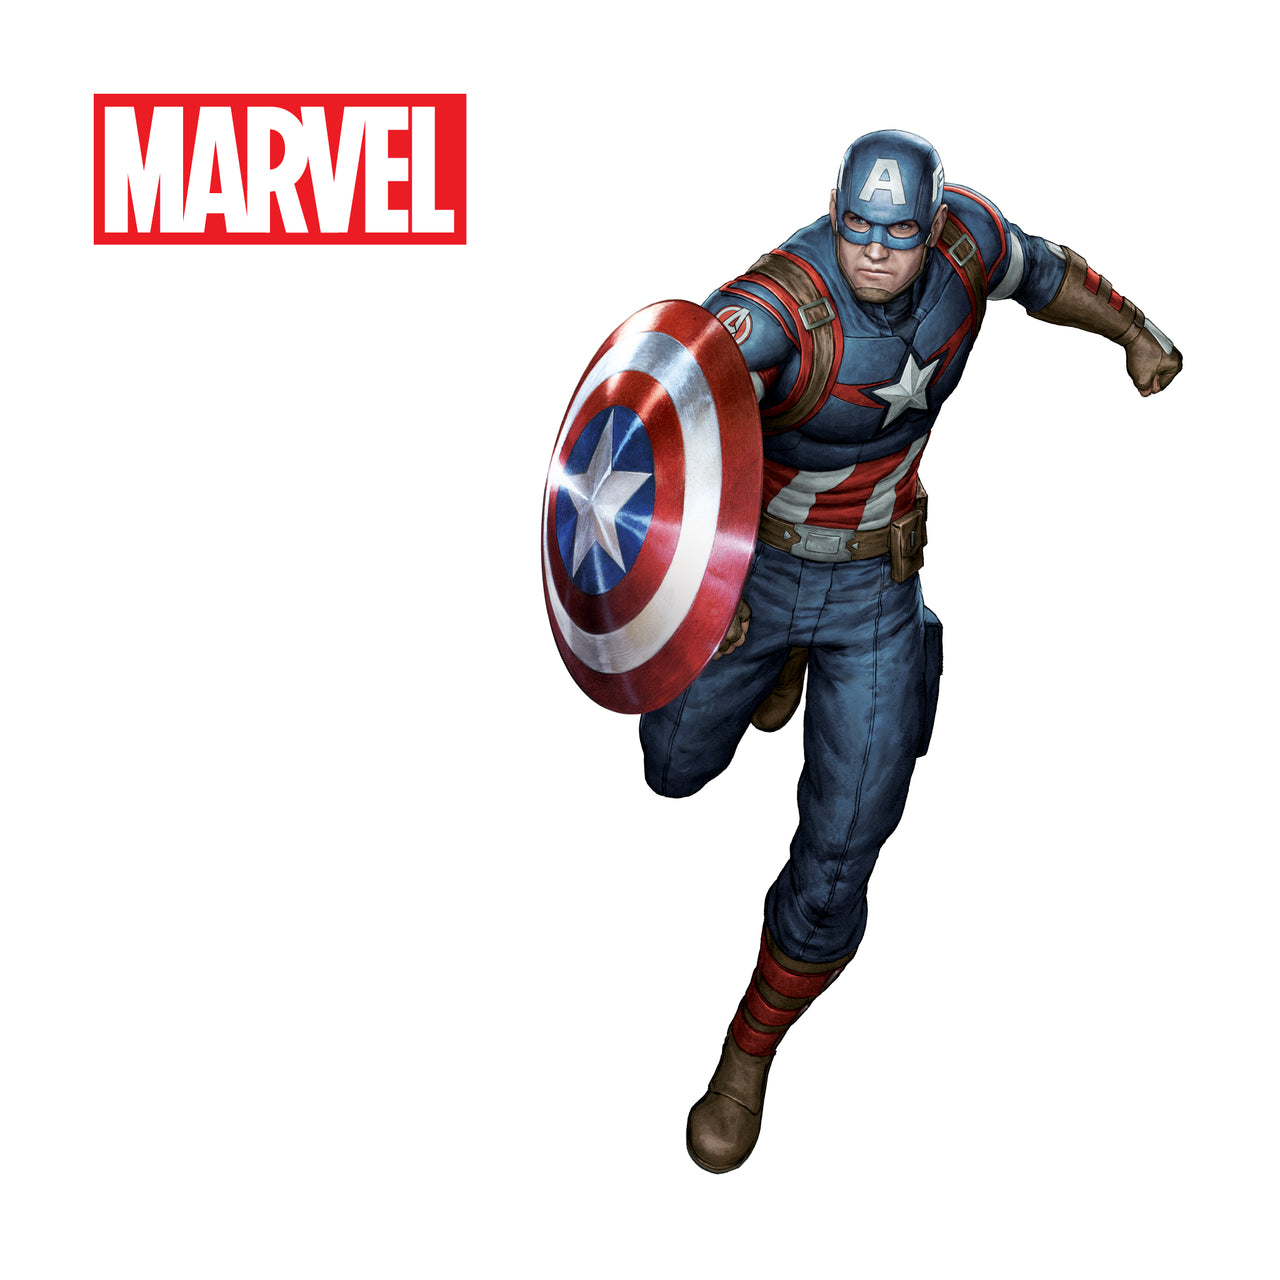 Captain America Interactive Wall Decal